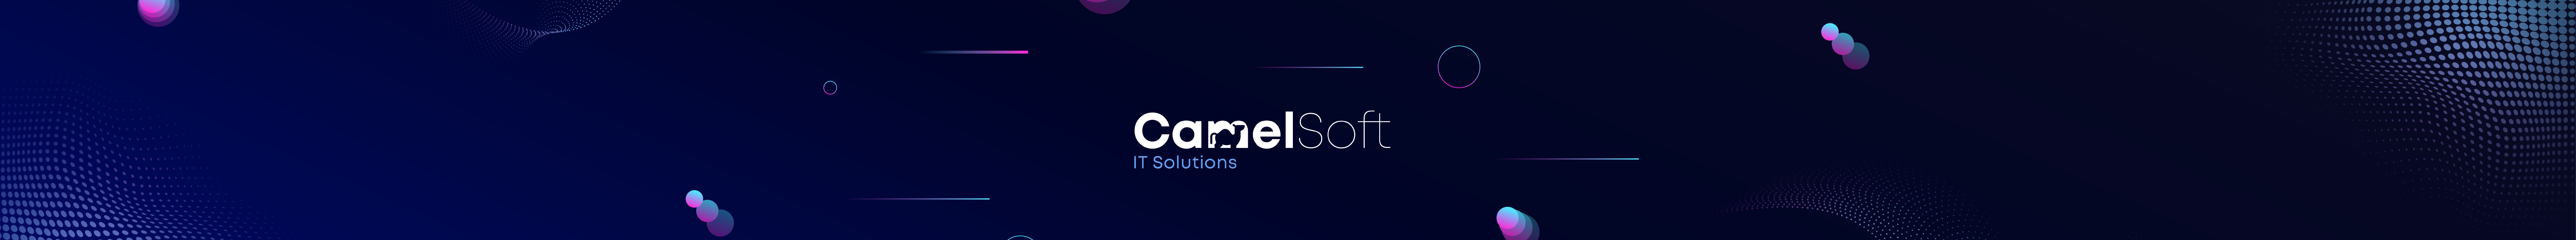 CamelSoft technology's profile banner